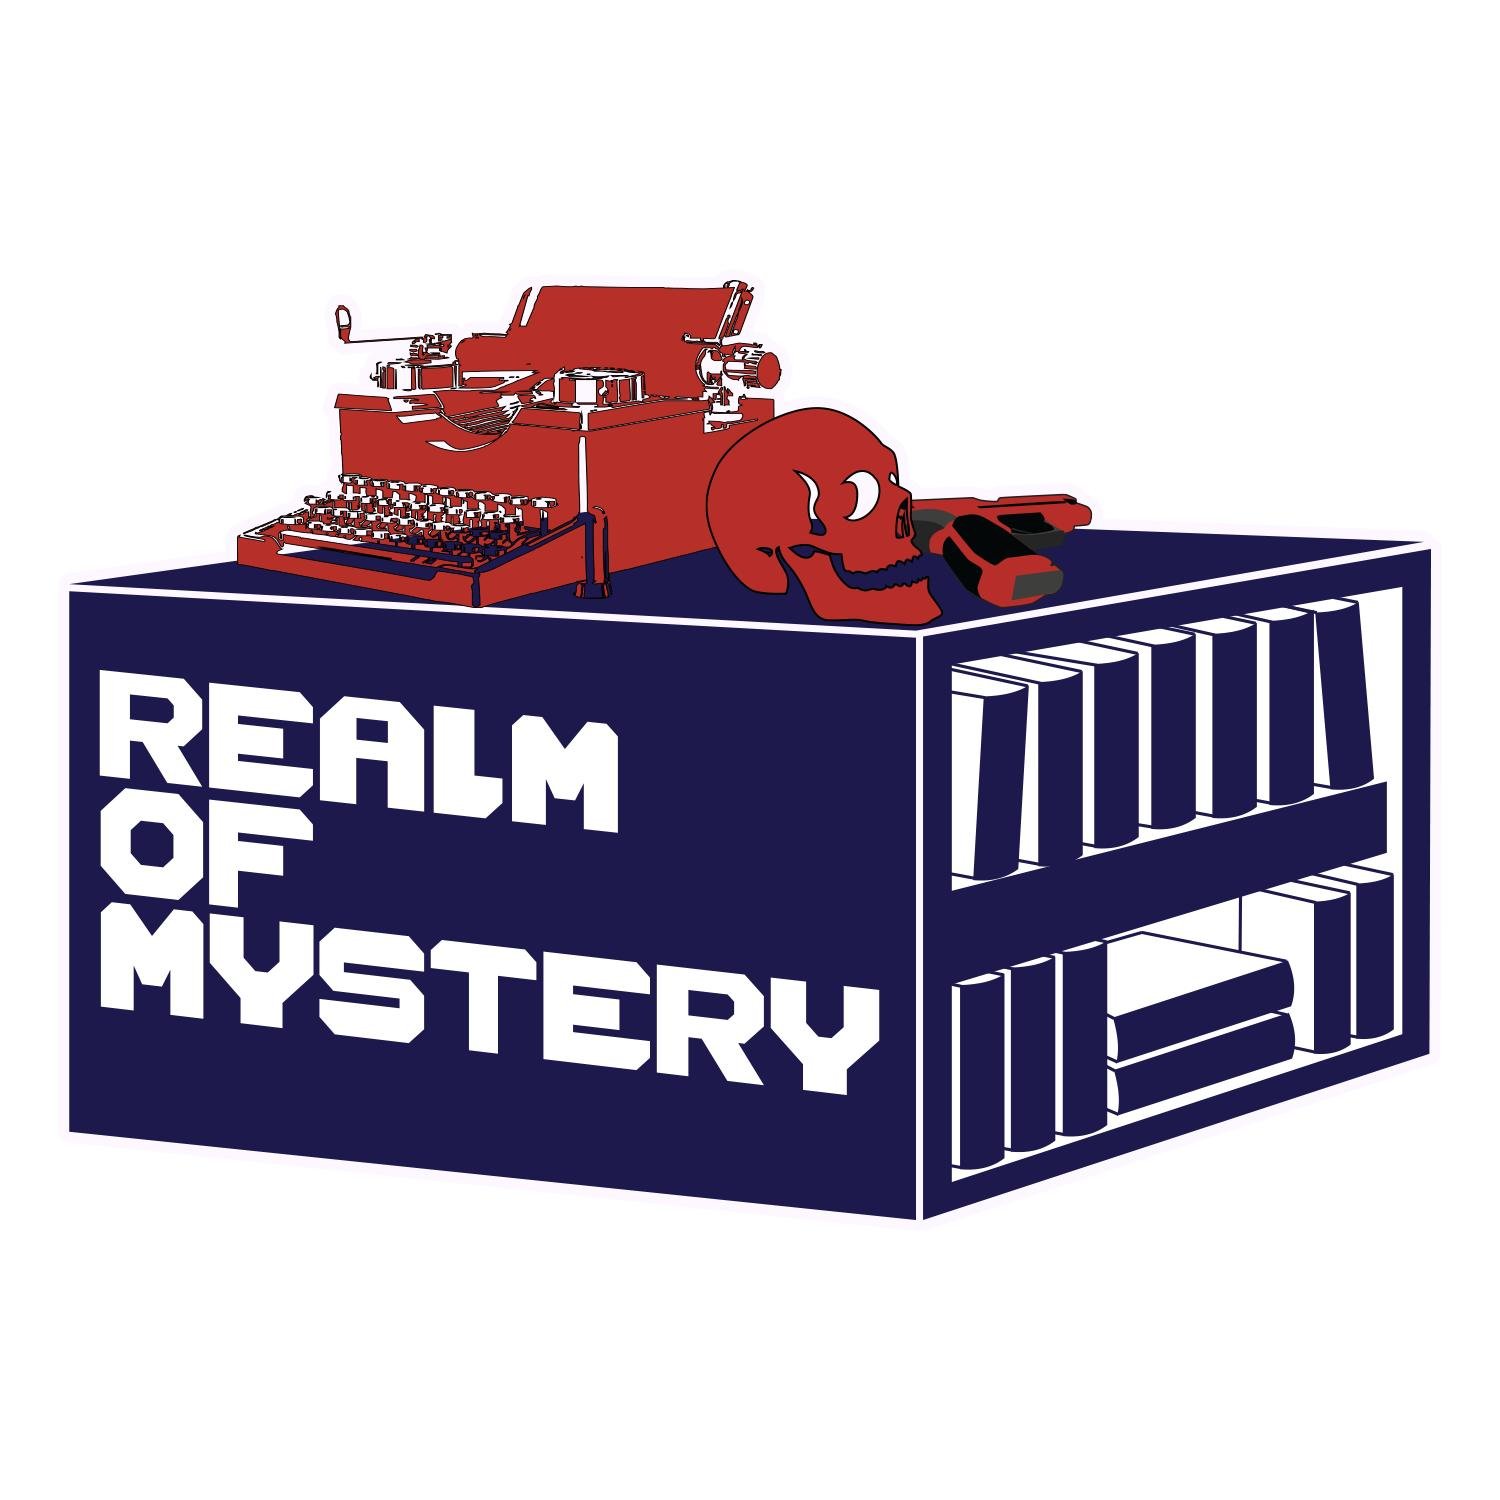 The Realm of Mystery is a podcast designed to give a lesson in the history in detective fiction, reviews mystery novels and help those who plan on writing